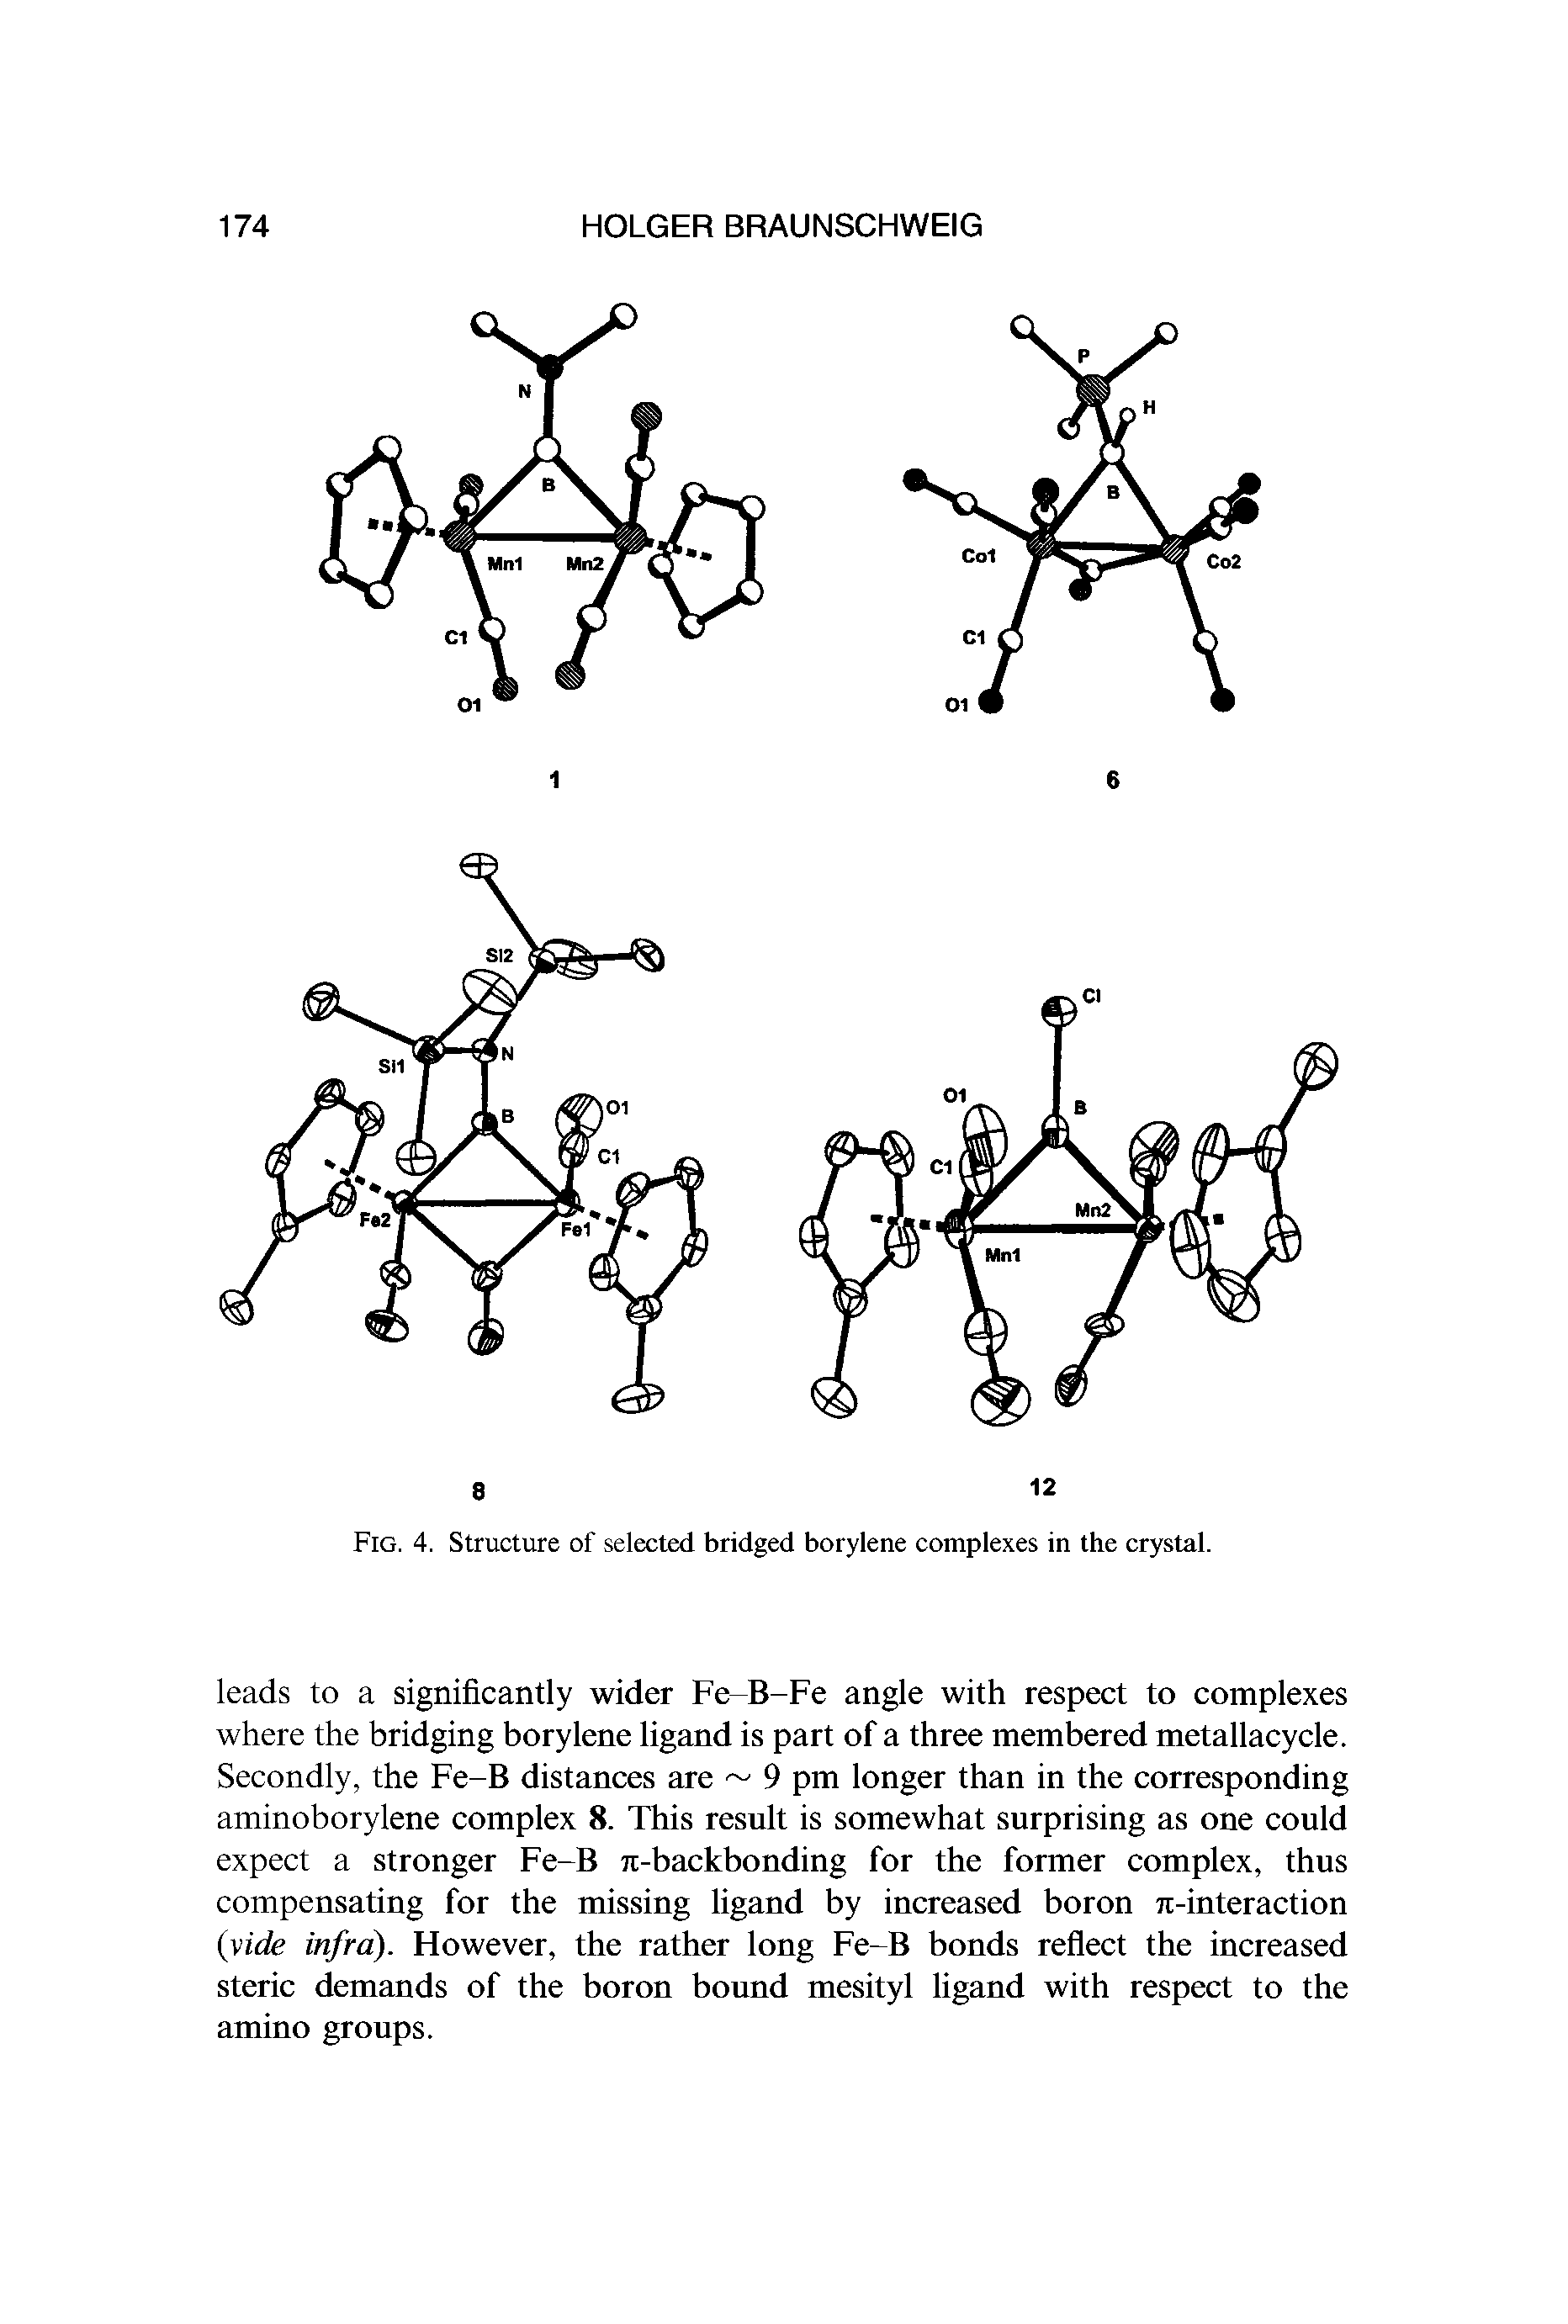 Fig. 4. Structure of selected bridged borylene complexes in the crystal.